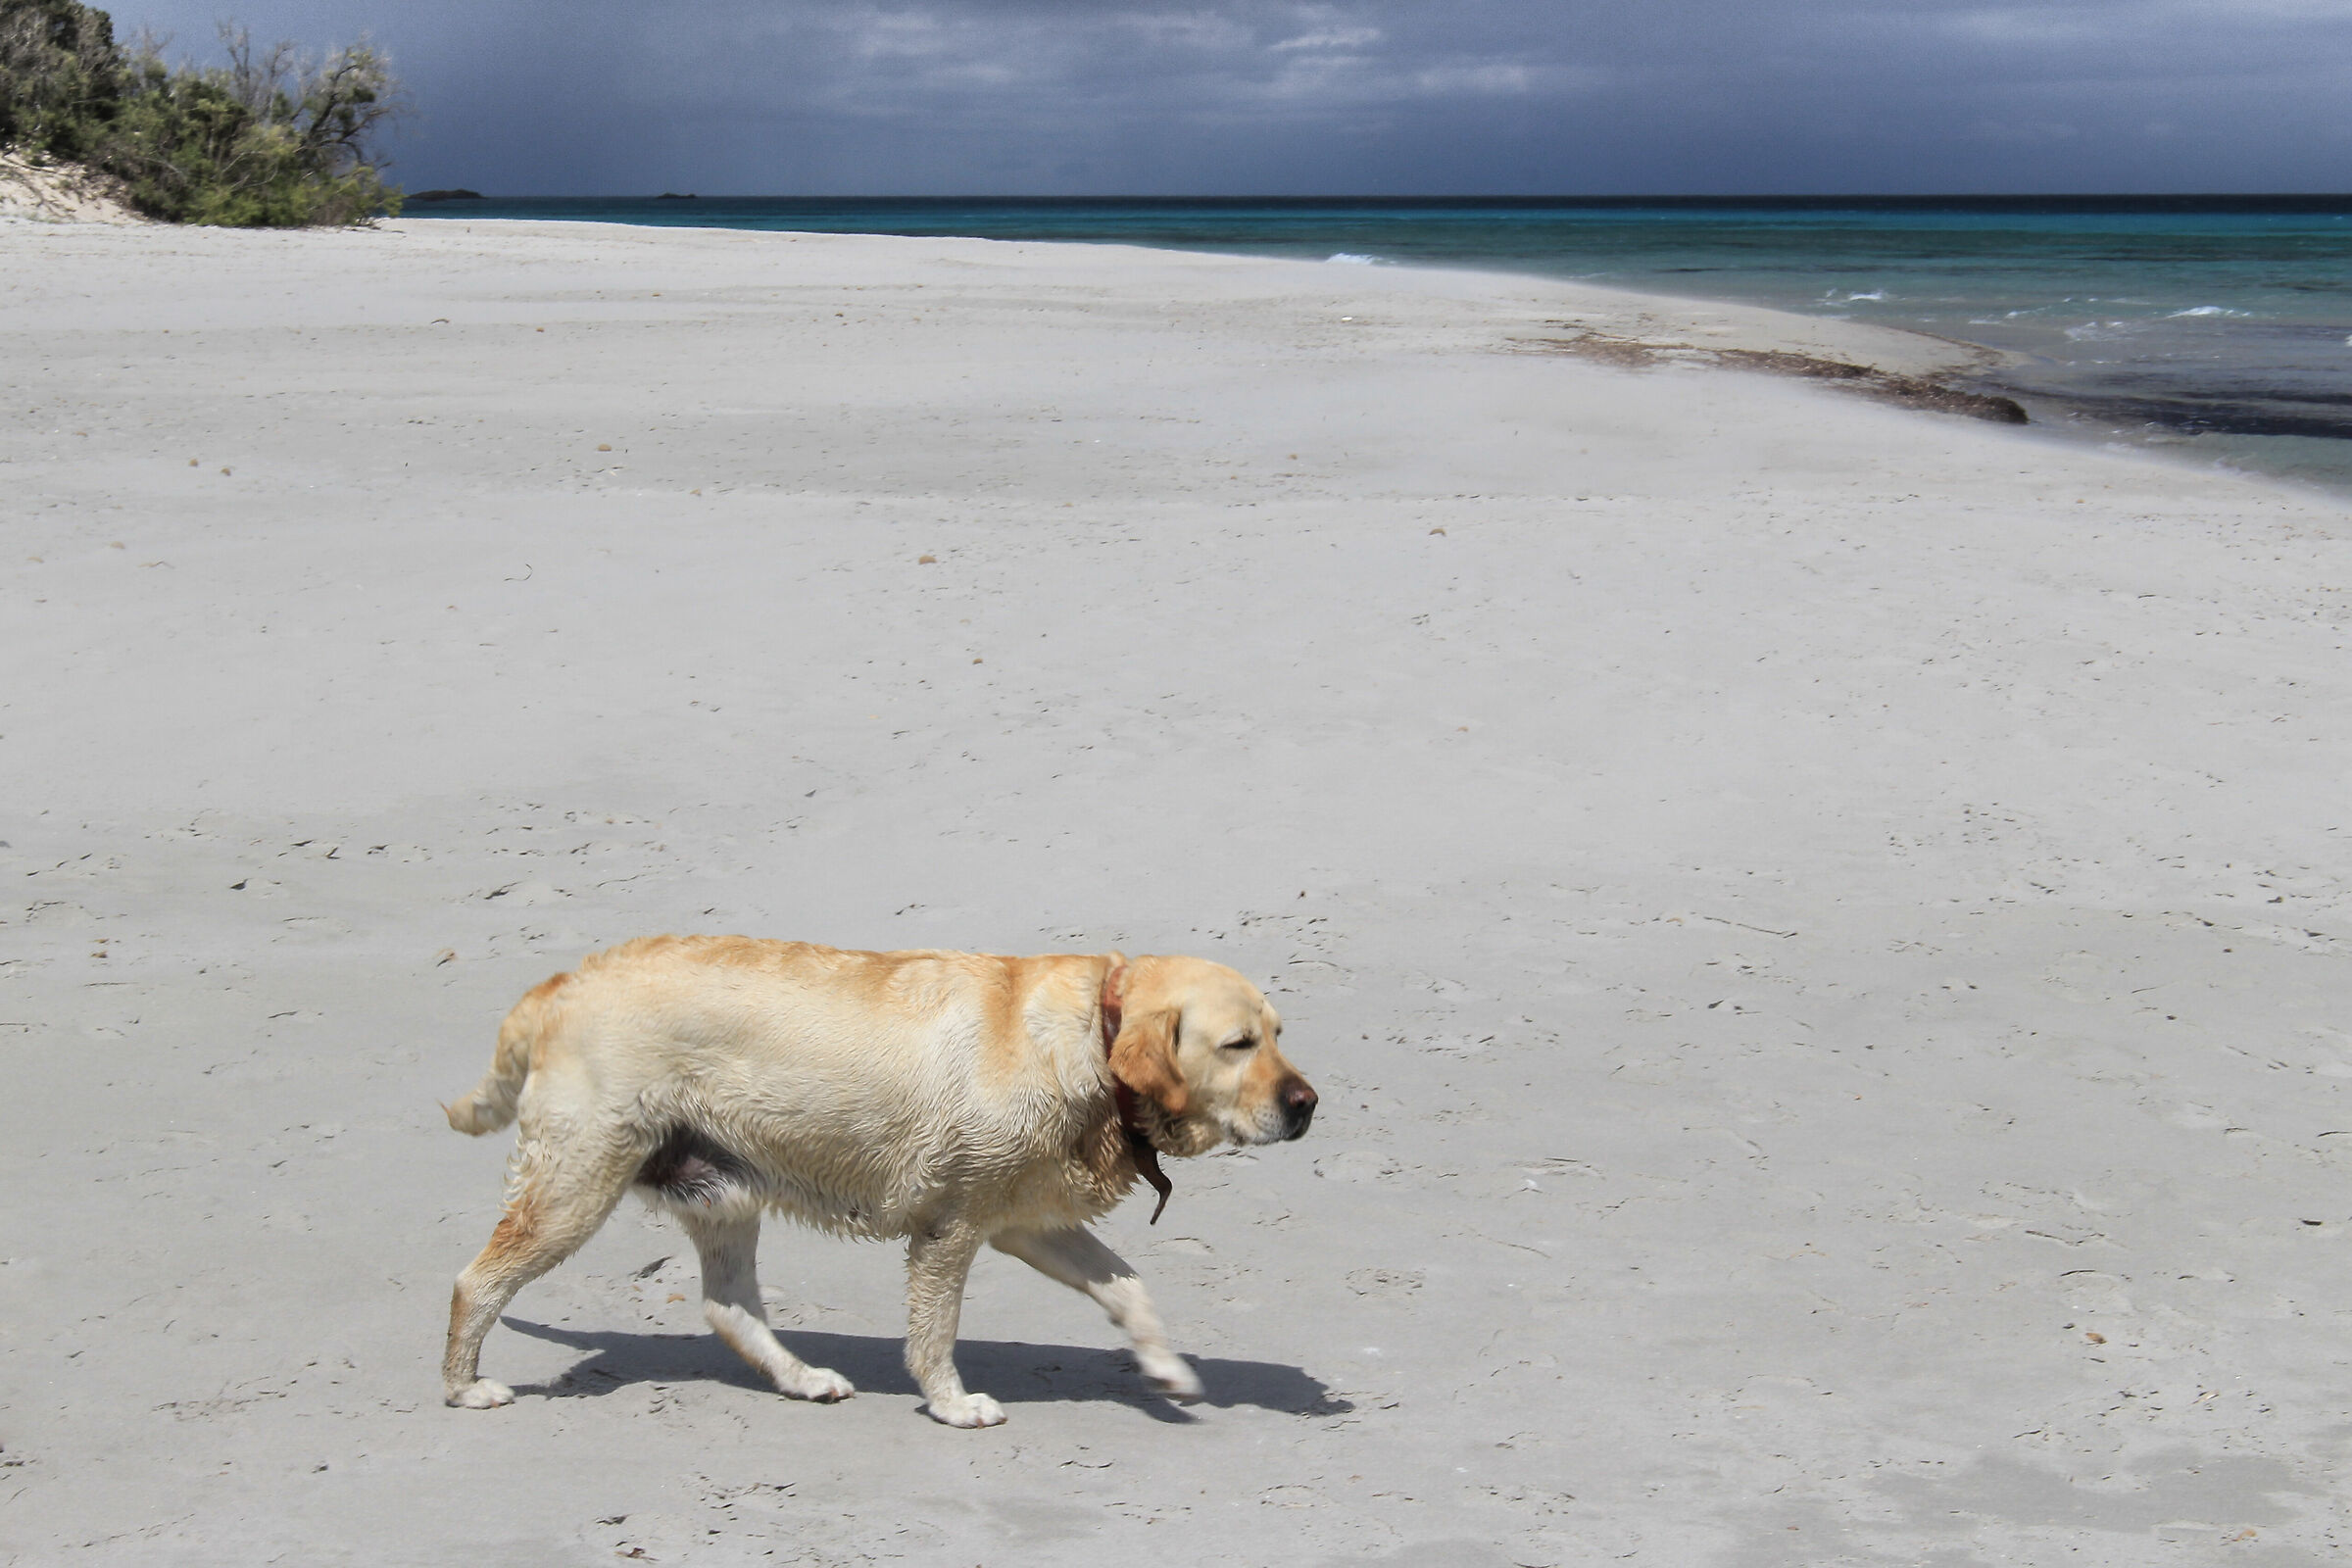 The dog and his beach...